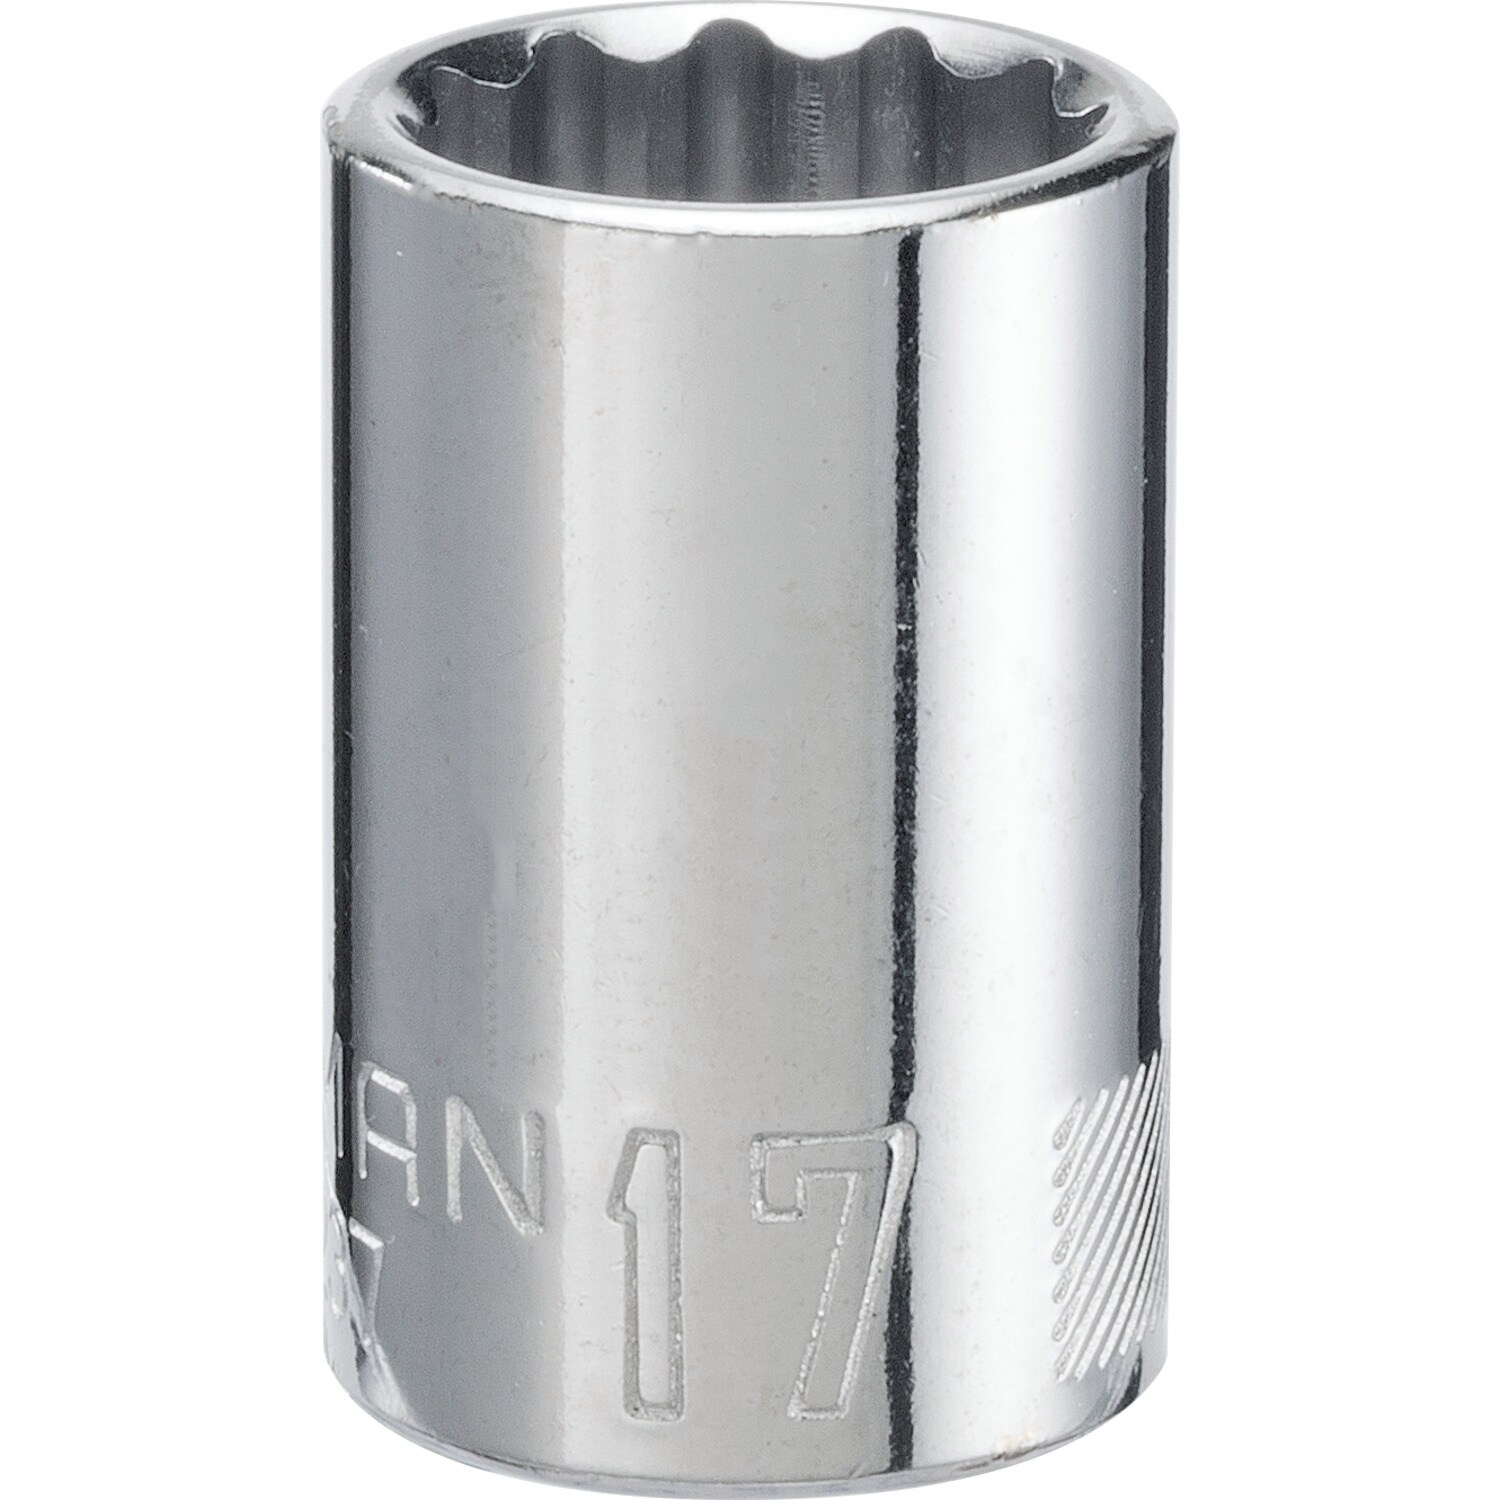 12 Point 17mm Williams STM-1217 1/2 Drive Shallow Socket 